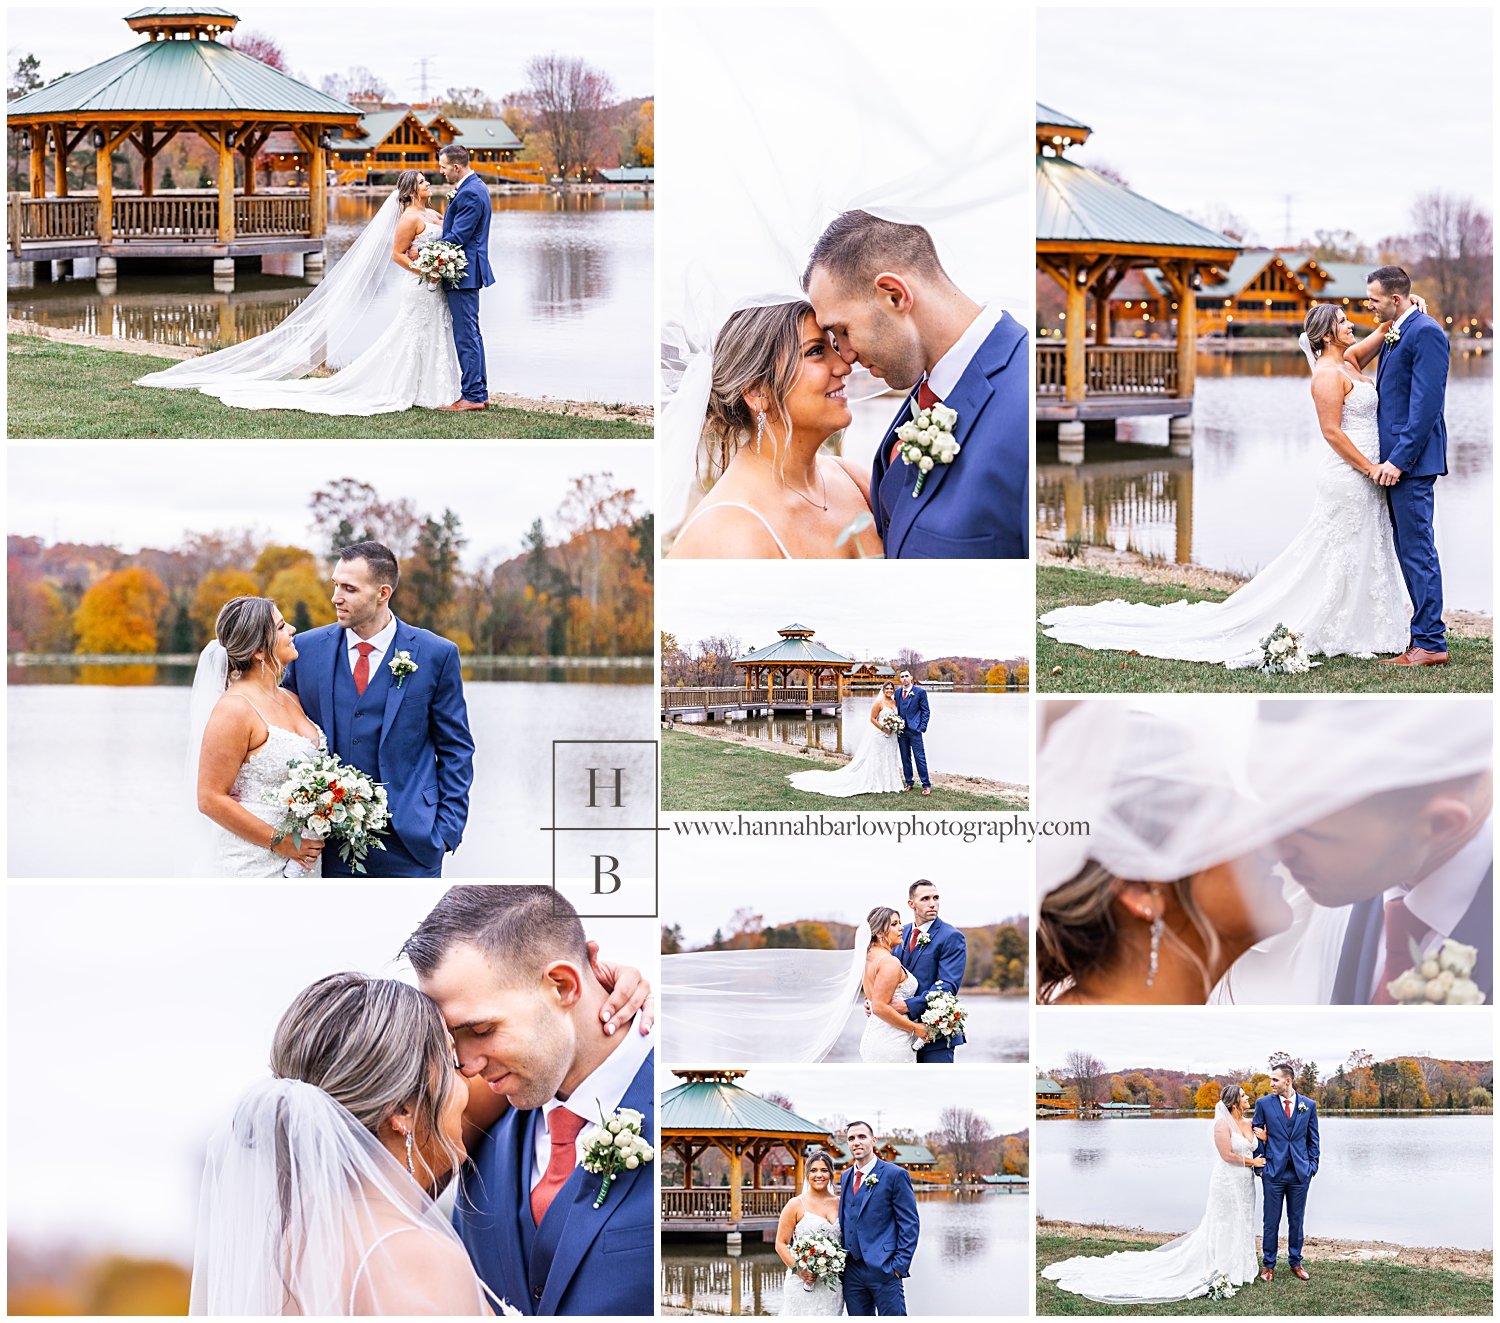 Bride and groom pose by lake while veil blows in wind